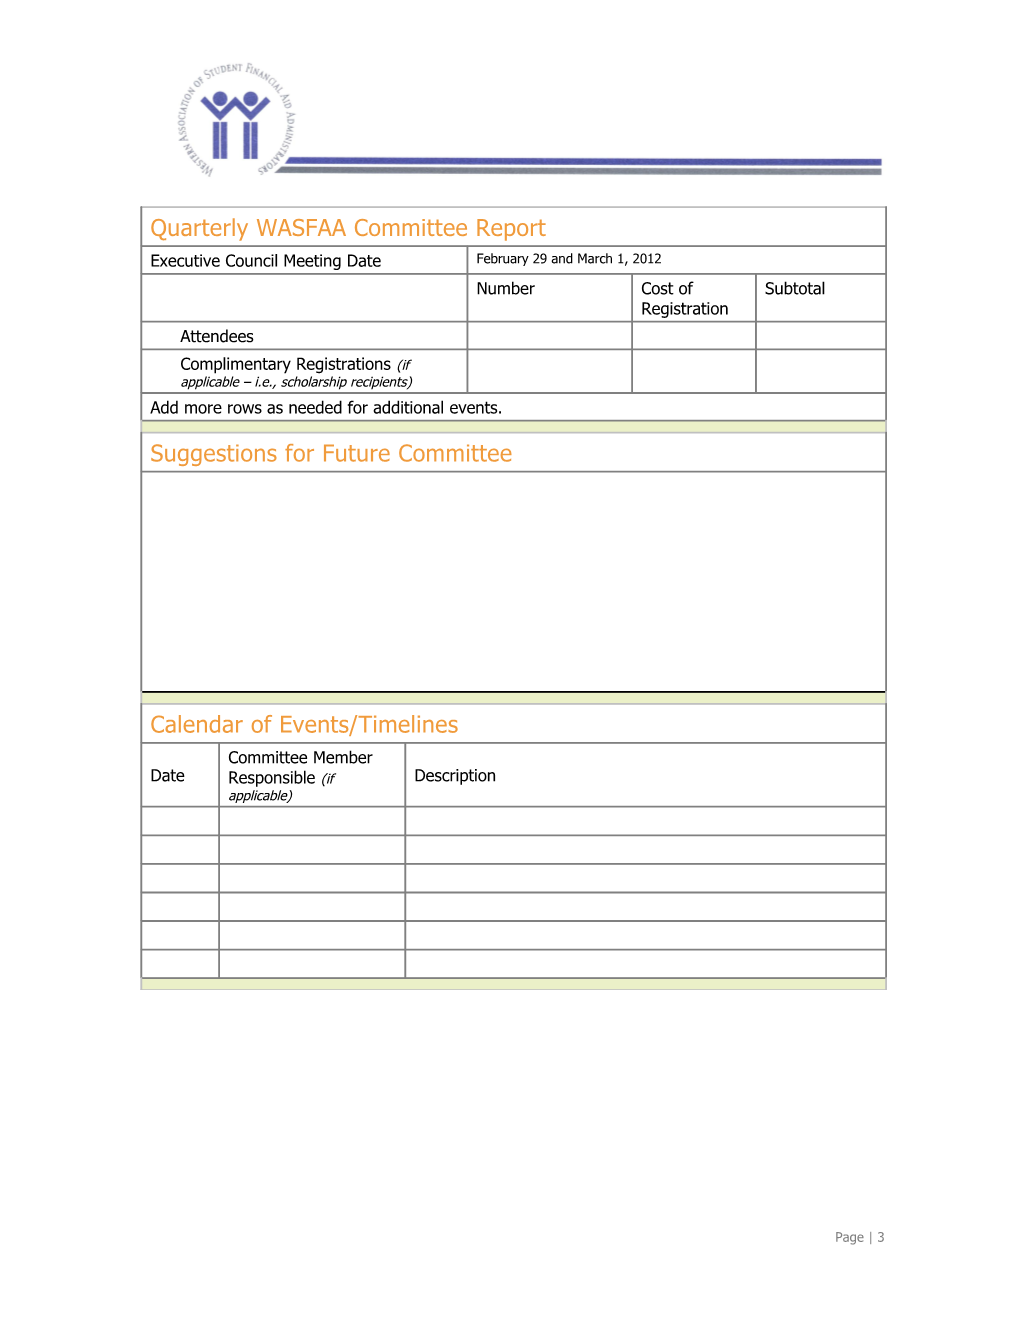 Save the Completed Report Using Committee Title and Date (Example: WASFAA JRSMLI Feb 10 s1